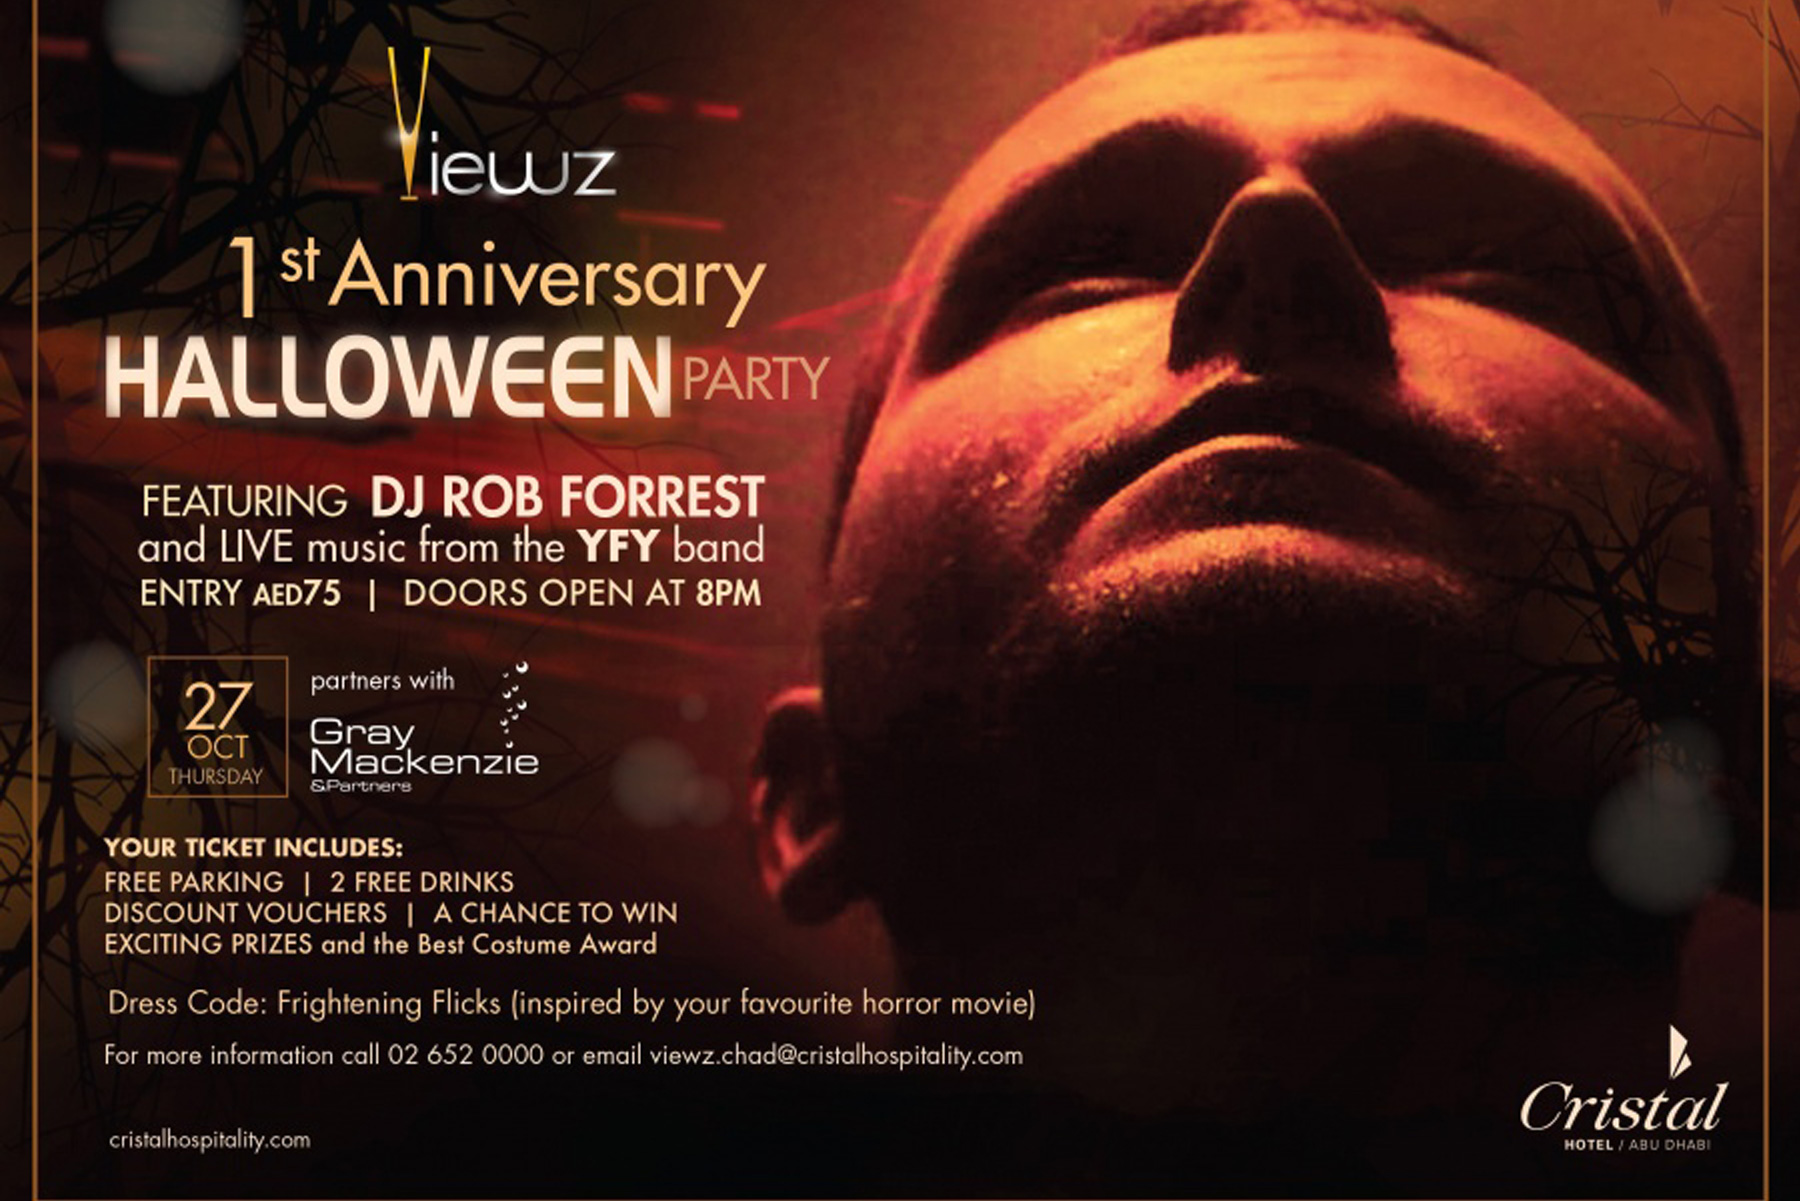 VIEWZ CELEBRATES ITS FIRST ANNIVERSARY WITH A HALLOWEEN PARTY